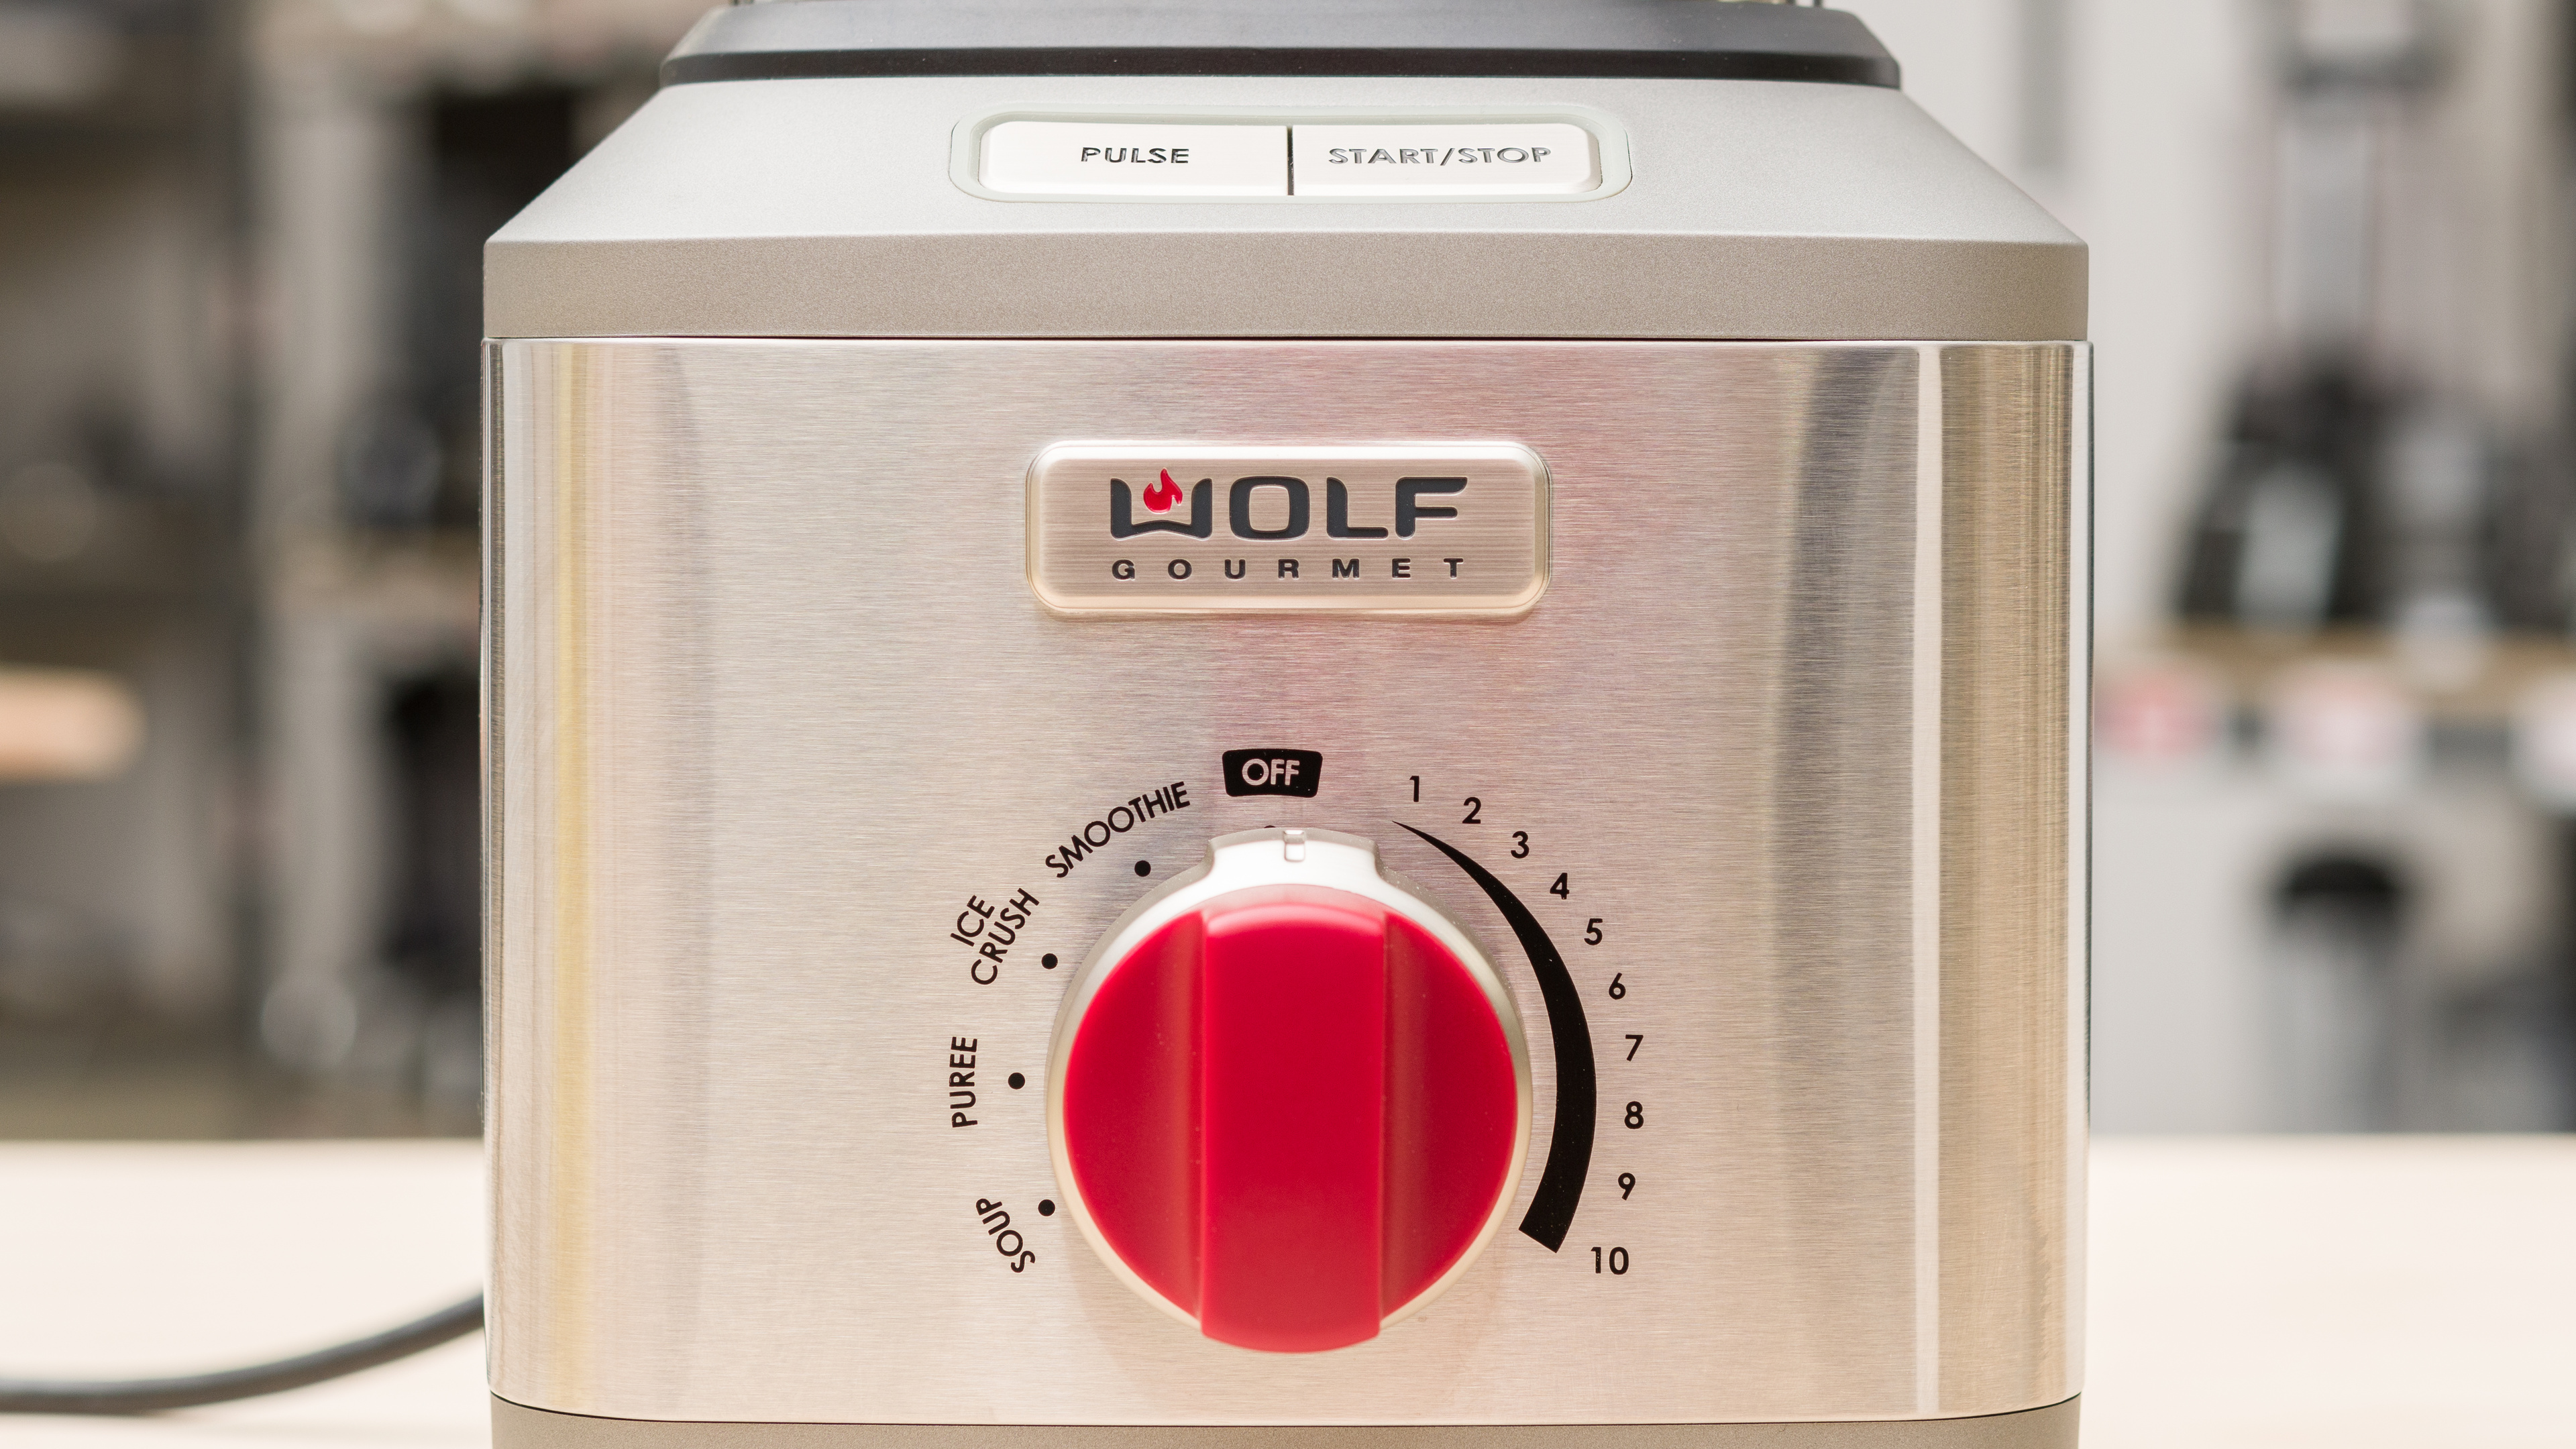 Full-size blenders can offer a wide range of speeds and programs (Wolf Gourmet Pro-Performance)